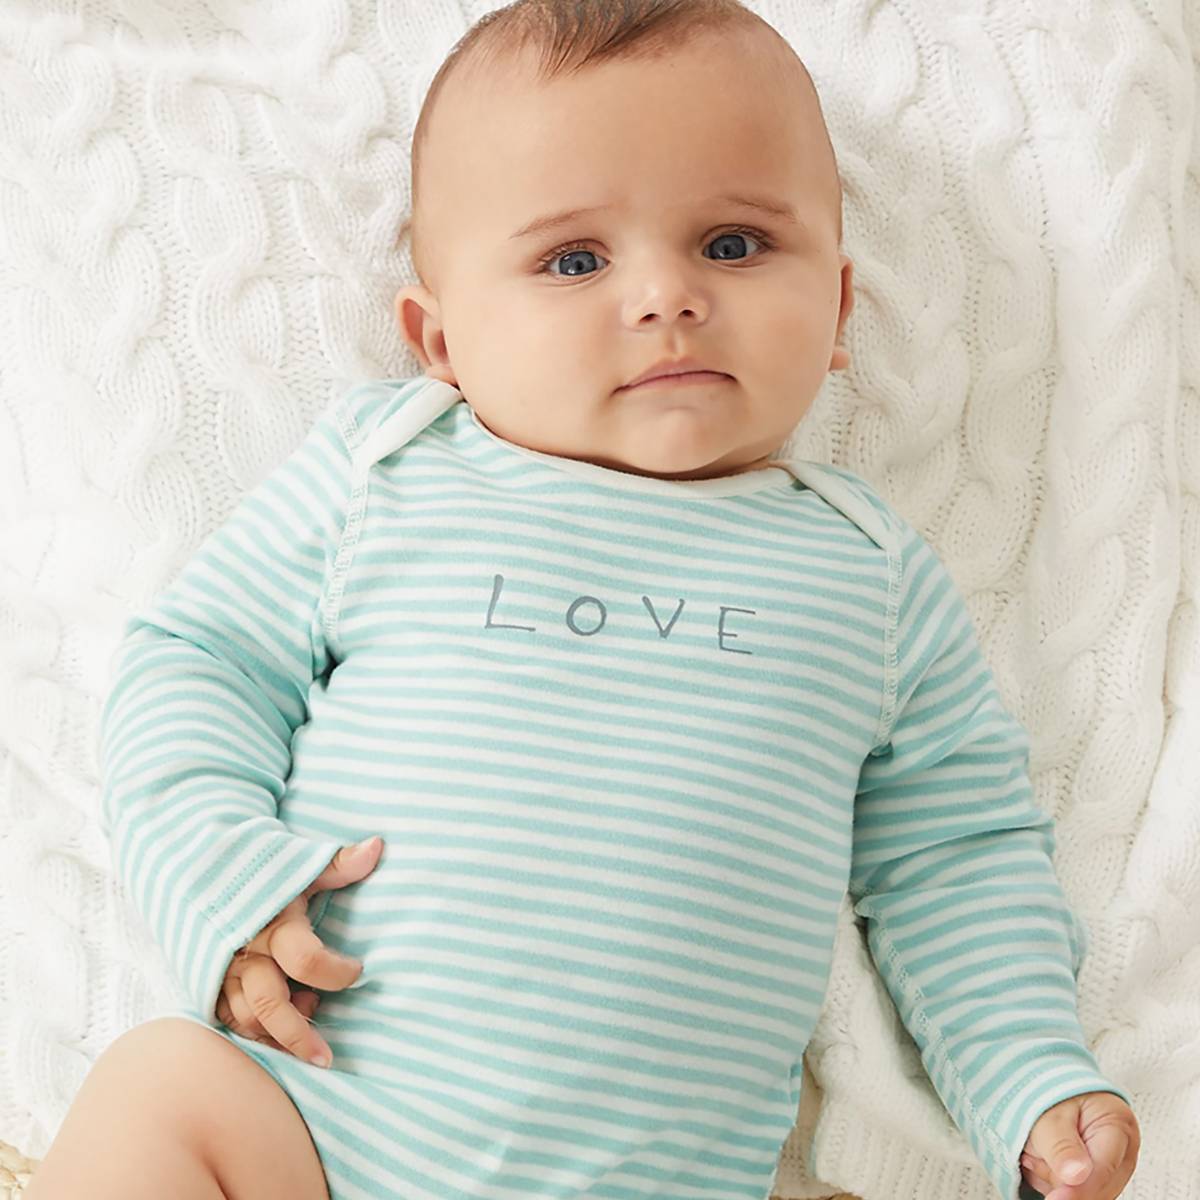 Baby wearing white and green striped babygrow. Shop babygrows